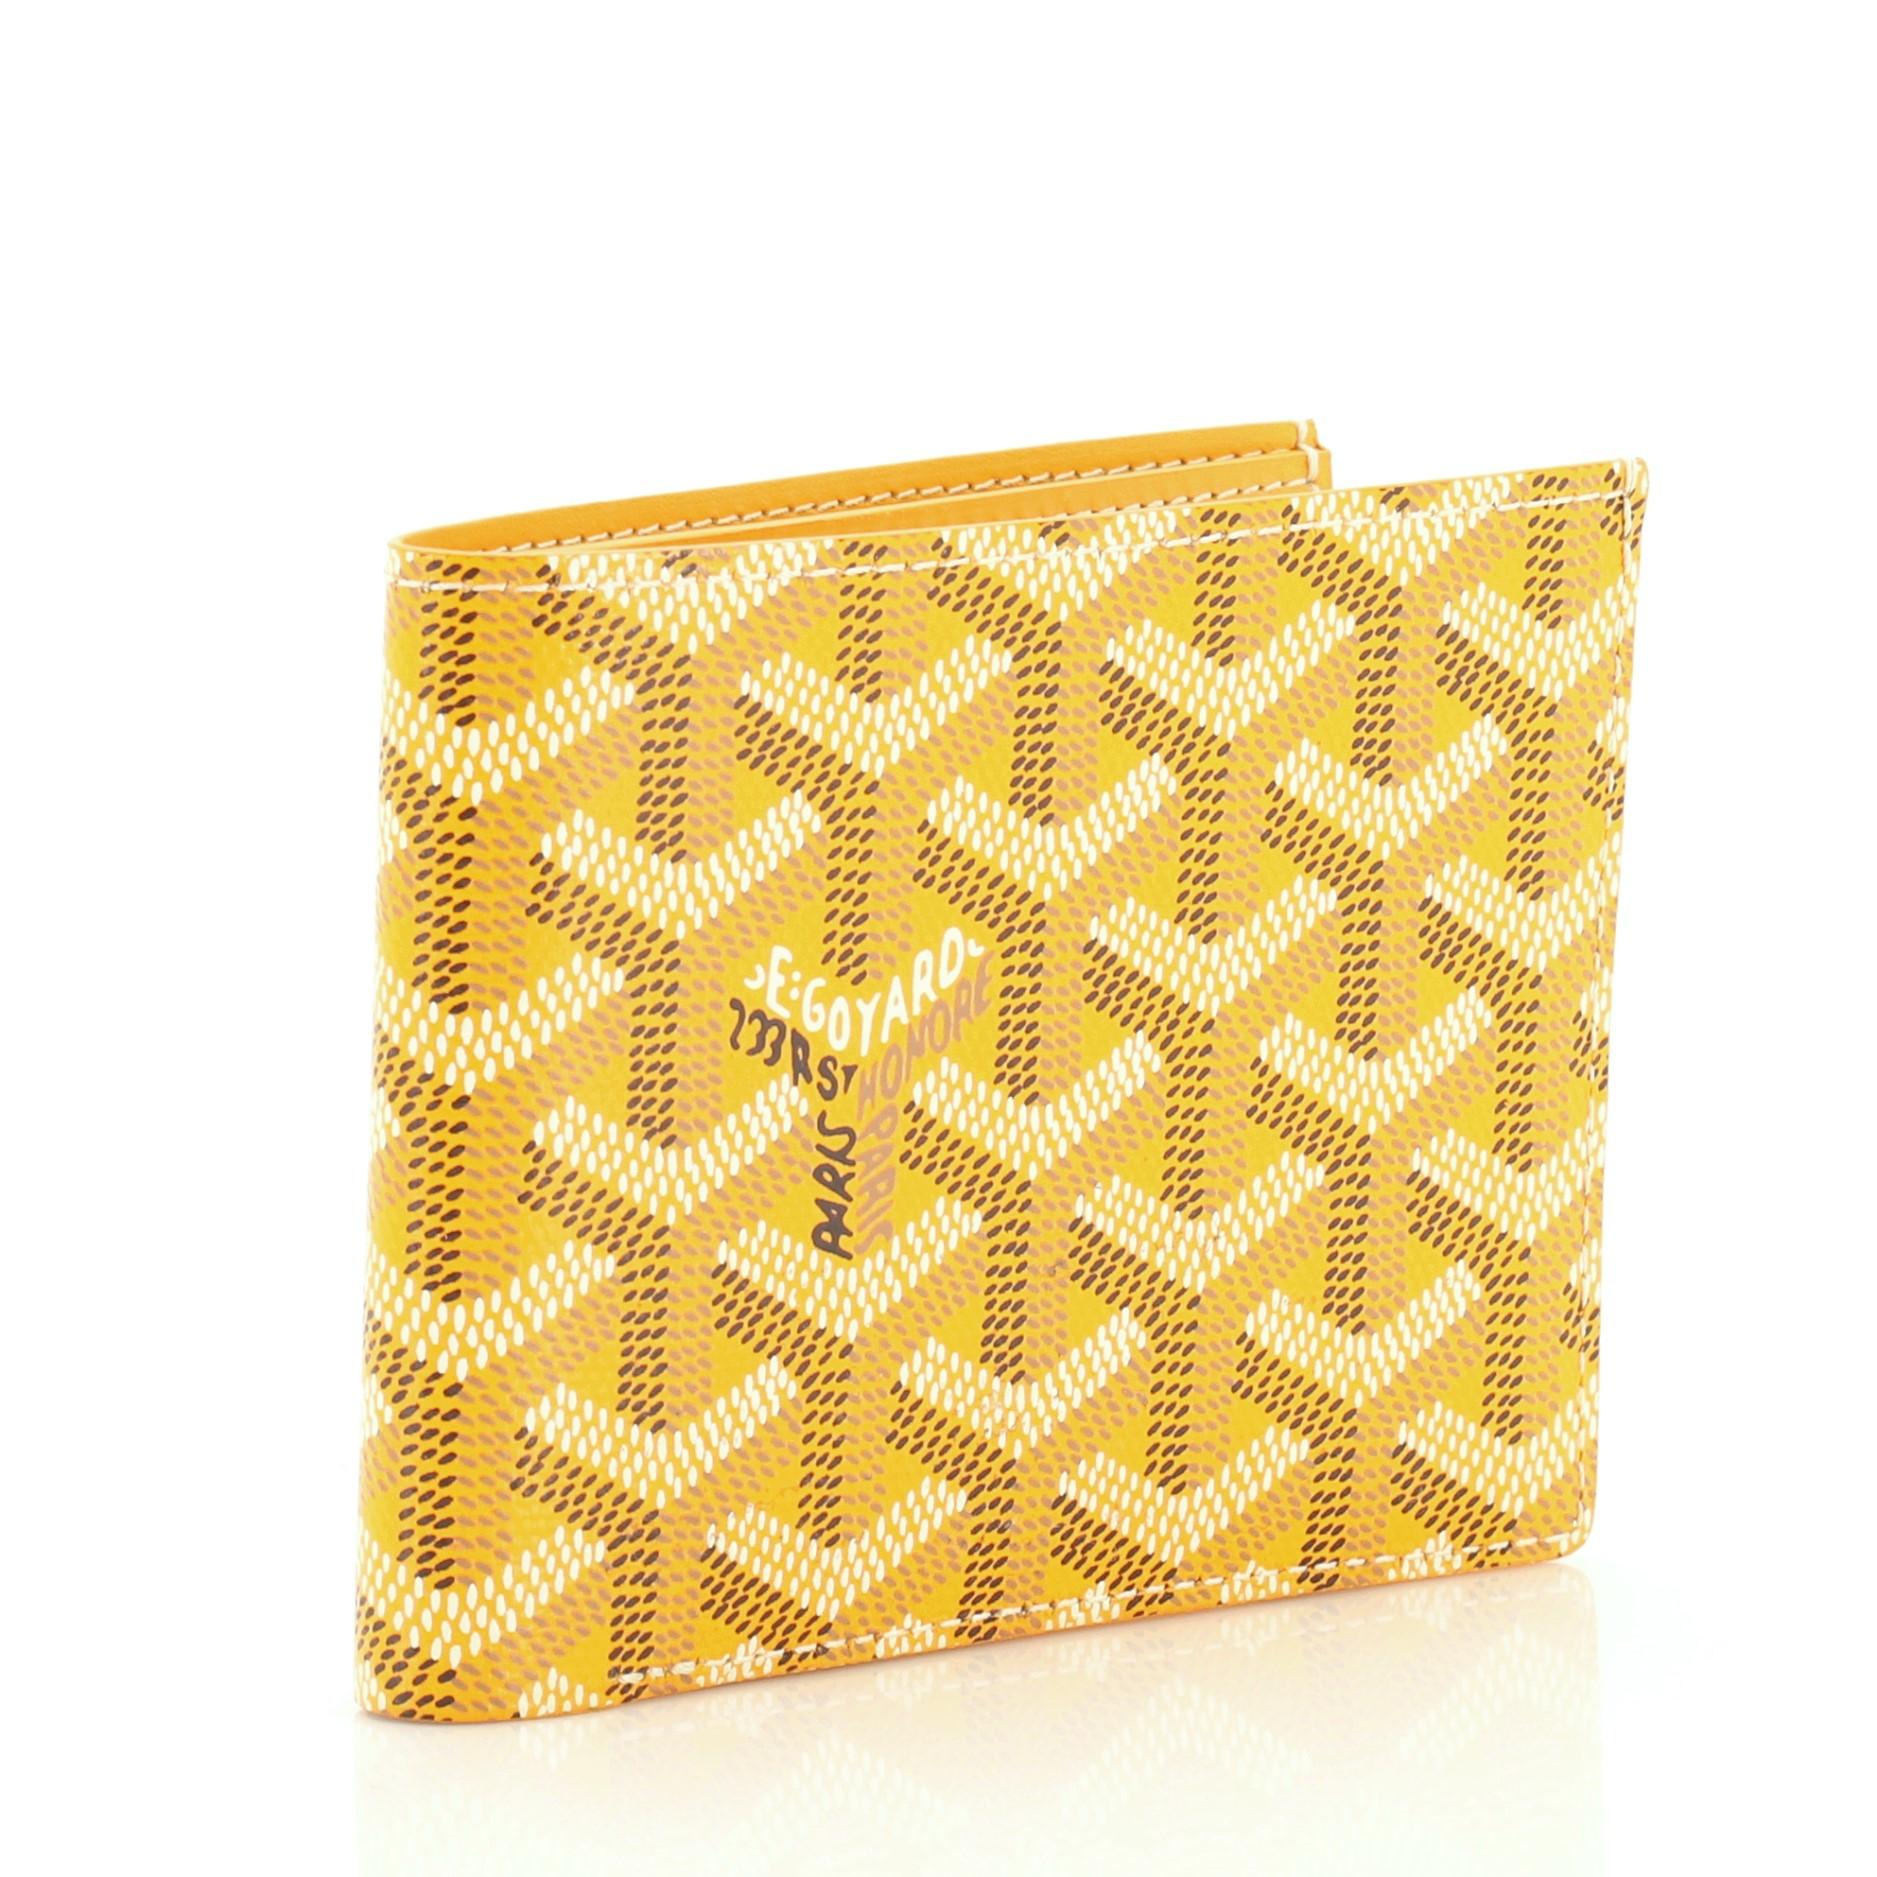 This Goyard Victoire Wallet Coated Canvas, crafted from yellow coated canvas, features a folder style silhouette. It opens to a yellow leather interior with multiple card slots and slip pocket. 

Estimated Retail Price: $1,020
Condition: Excellent.